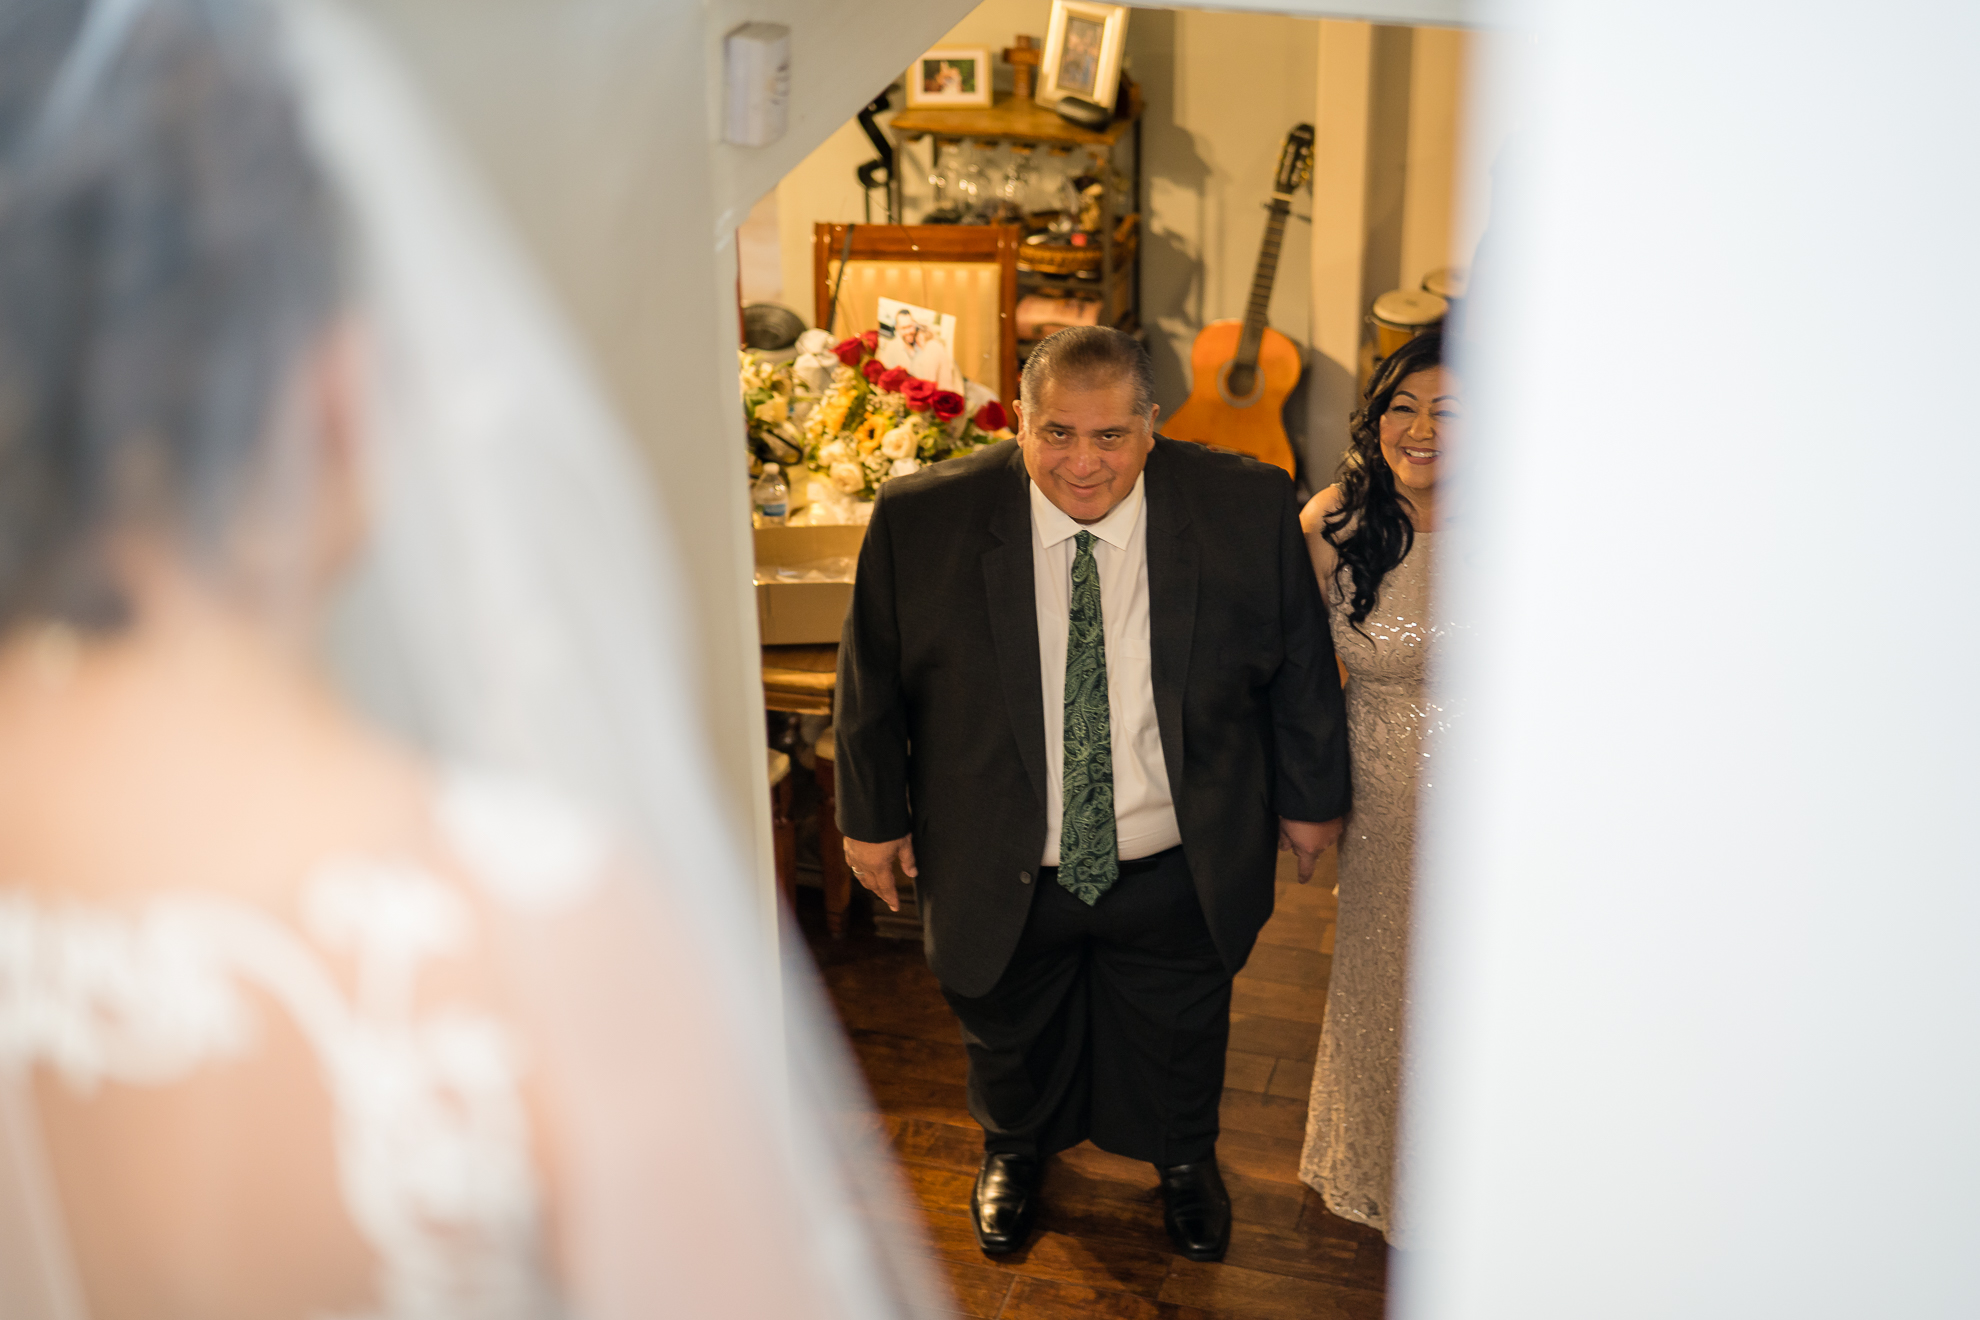 ThomasKim_photography A bride walks down the aisle with her father on her S.